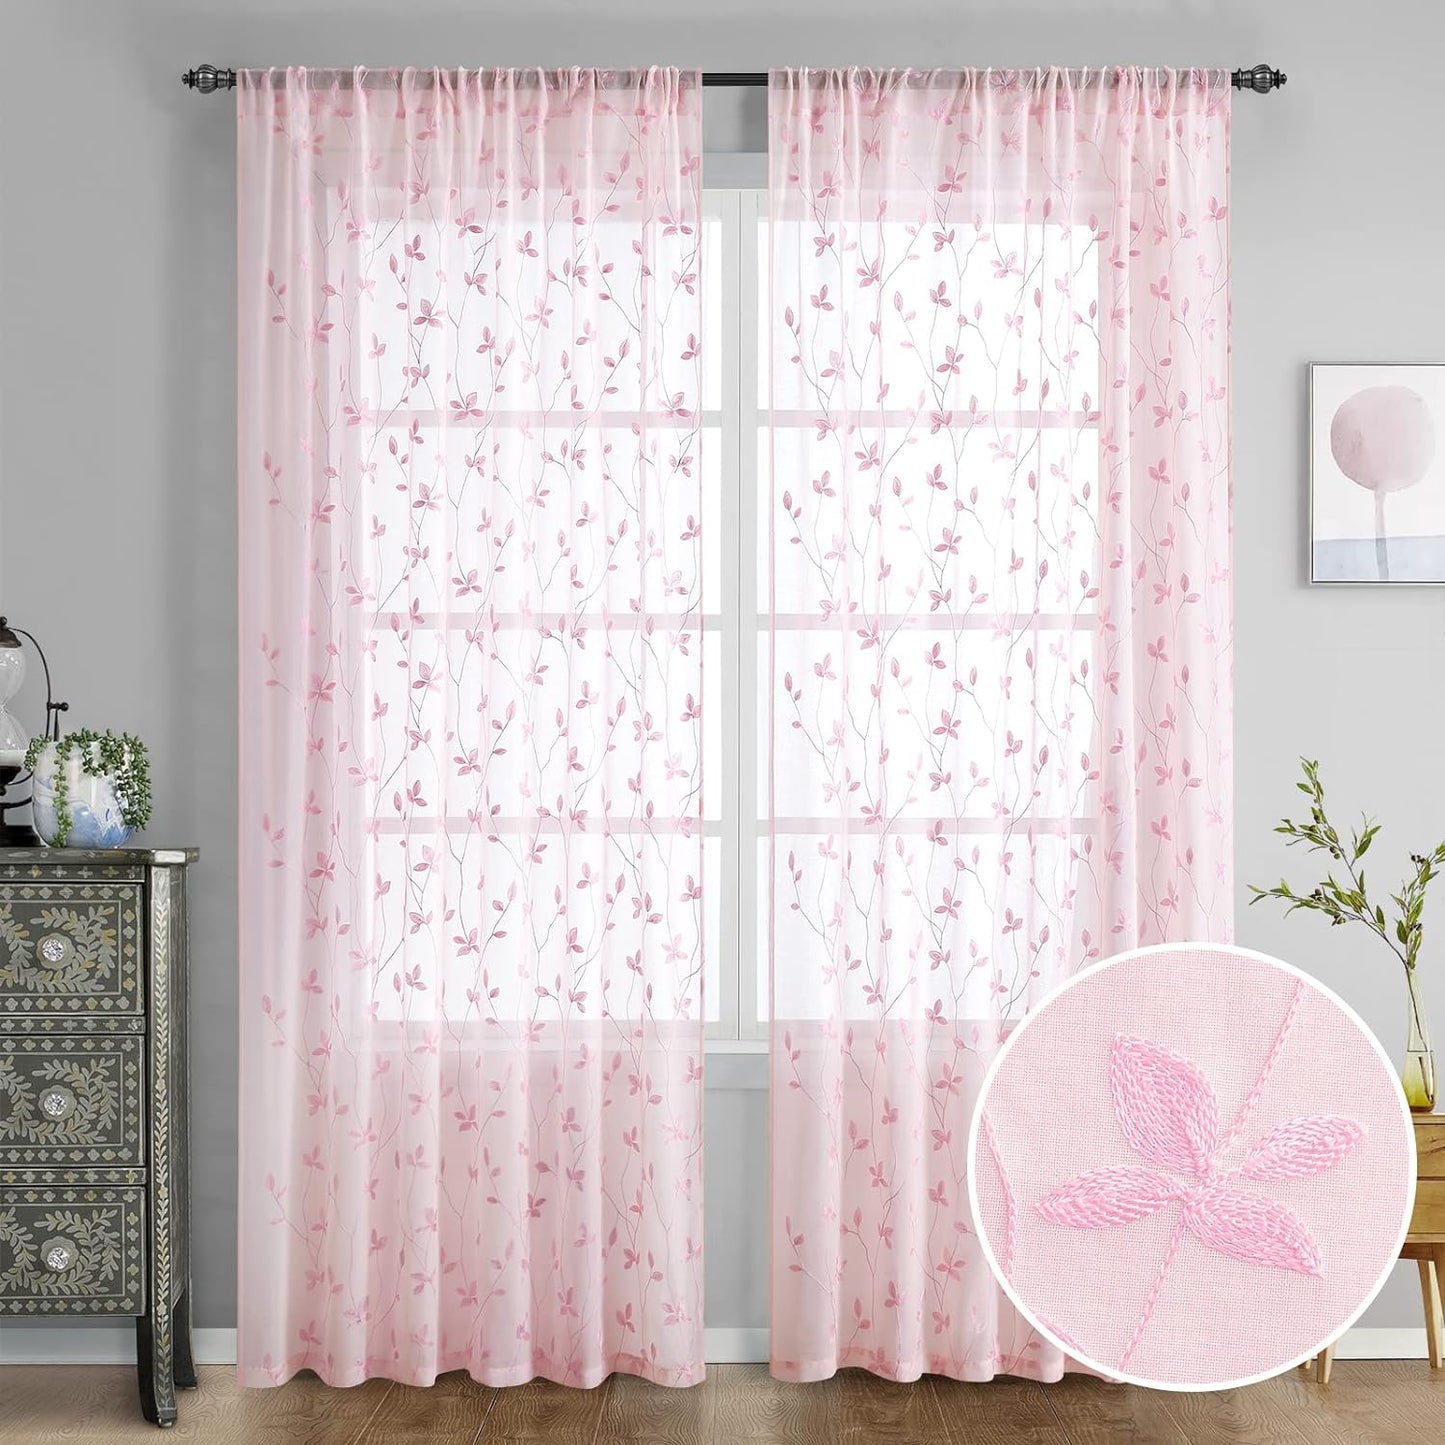 HOMEIDEAS Sage Green Sheer Curtains 52 X 63 Inches Length 2 Panels Embroidered Leaf Pattern Pocket Faux Linen Floral Semi Sheer Voile Window Curtains/Drapes for Bedroom Living Room  HOMEIDEAS Vine Pink W52" X L84" 